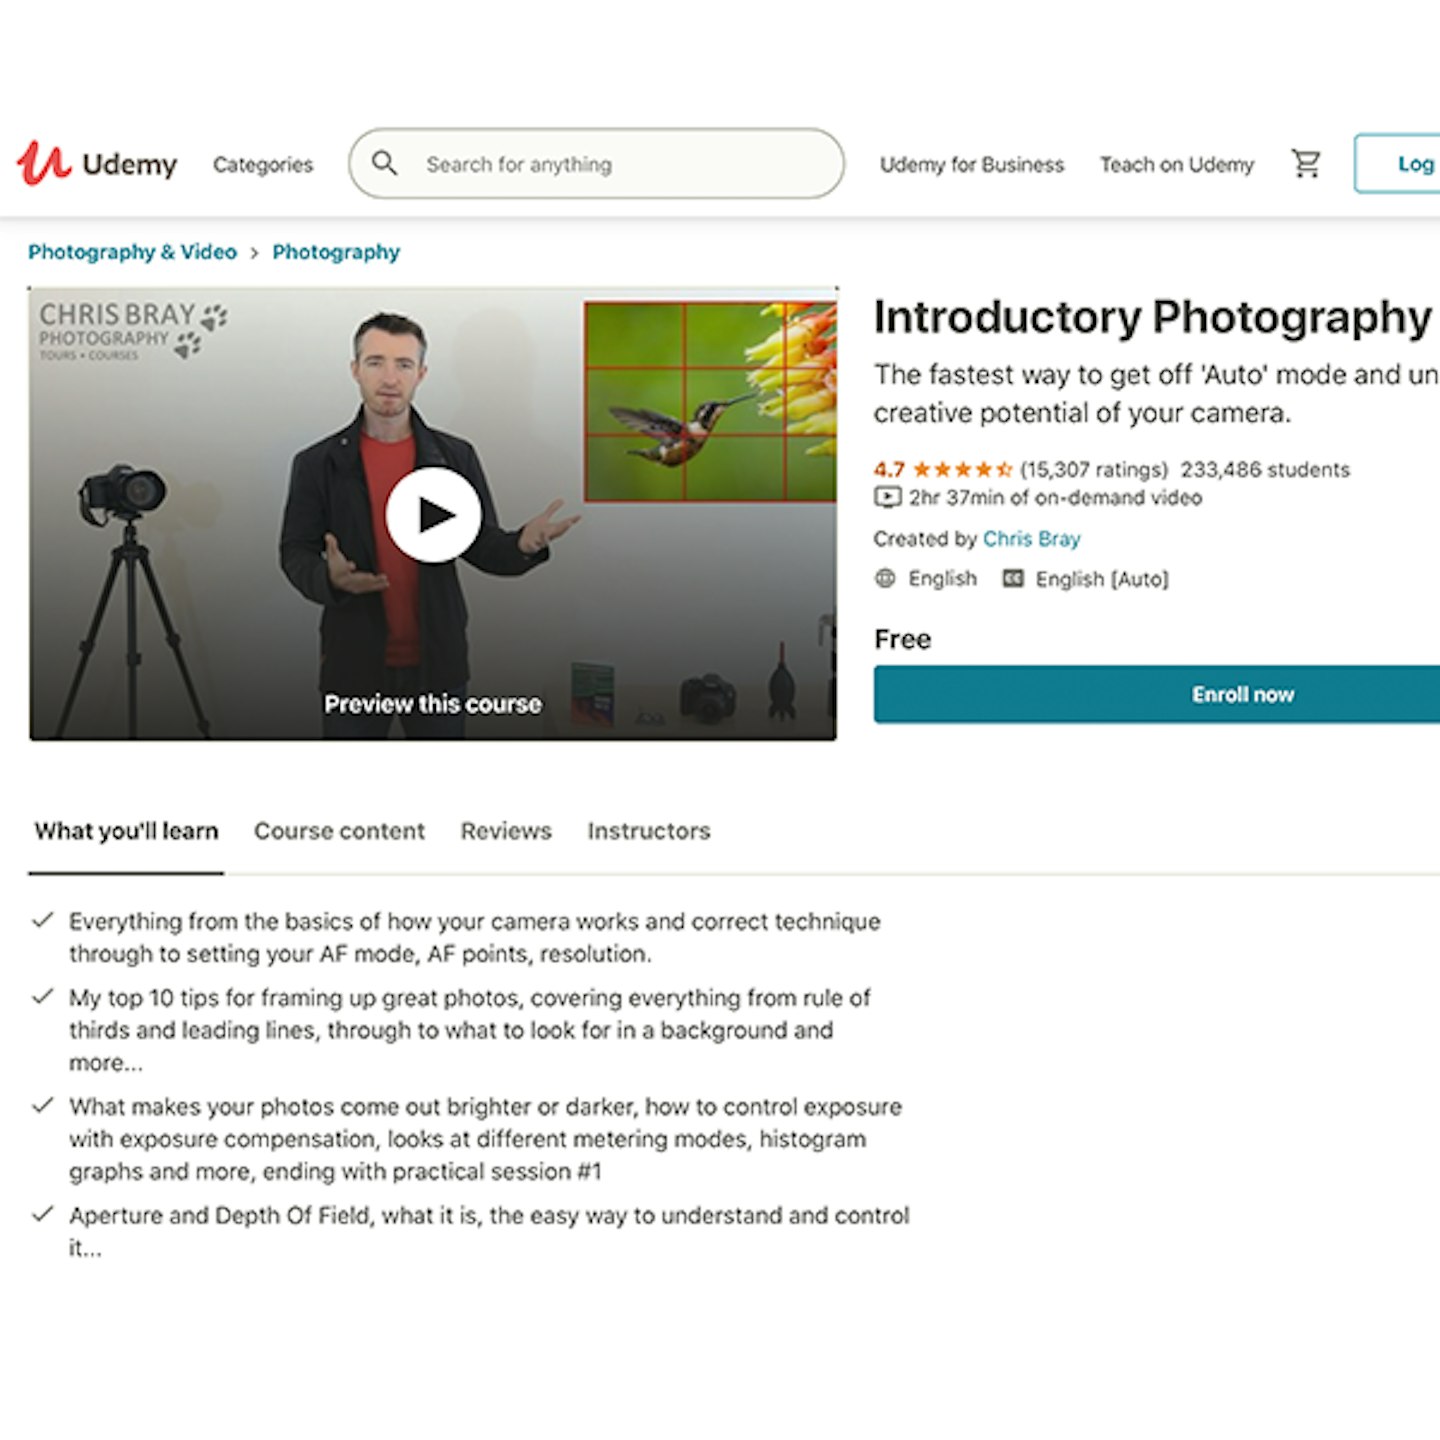 Udemy - Introductory Photography Course